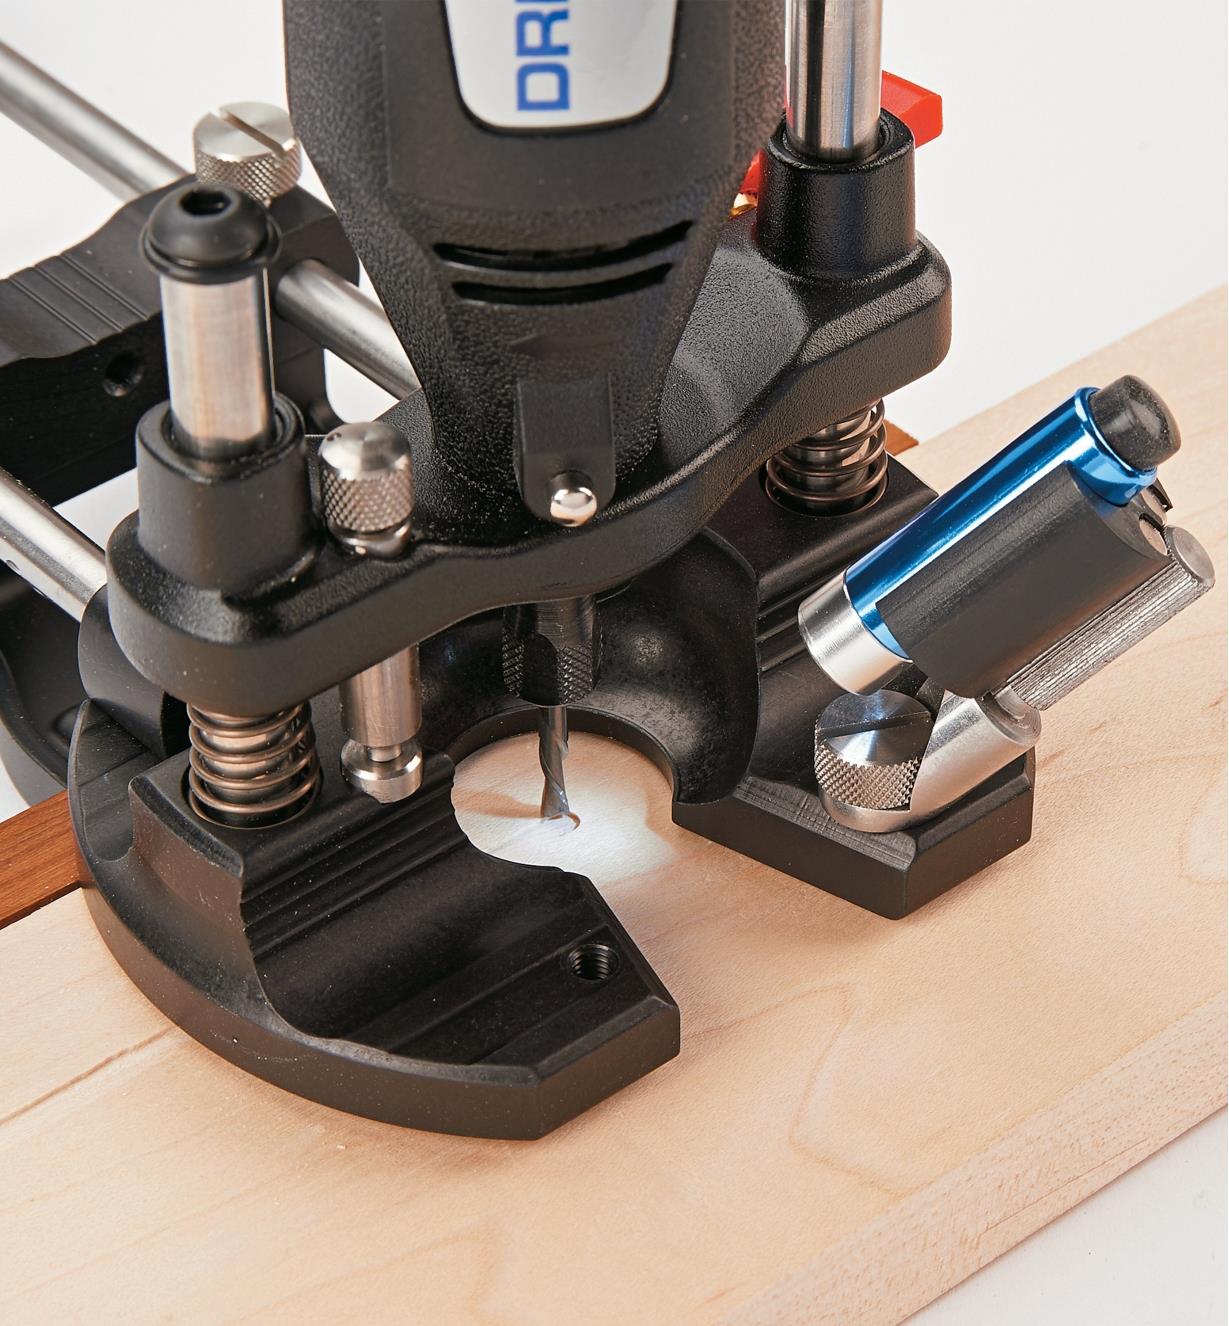 Task Light mounted to the Veritas Plunge Base being used with a rotary tool